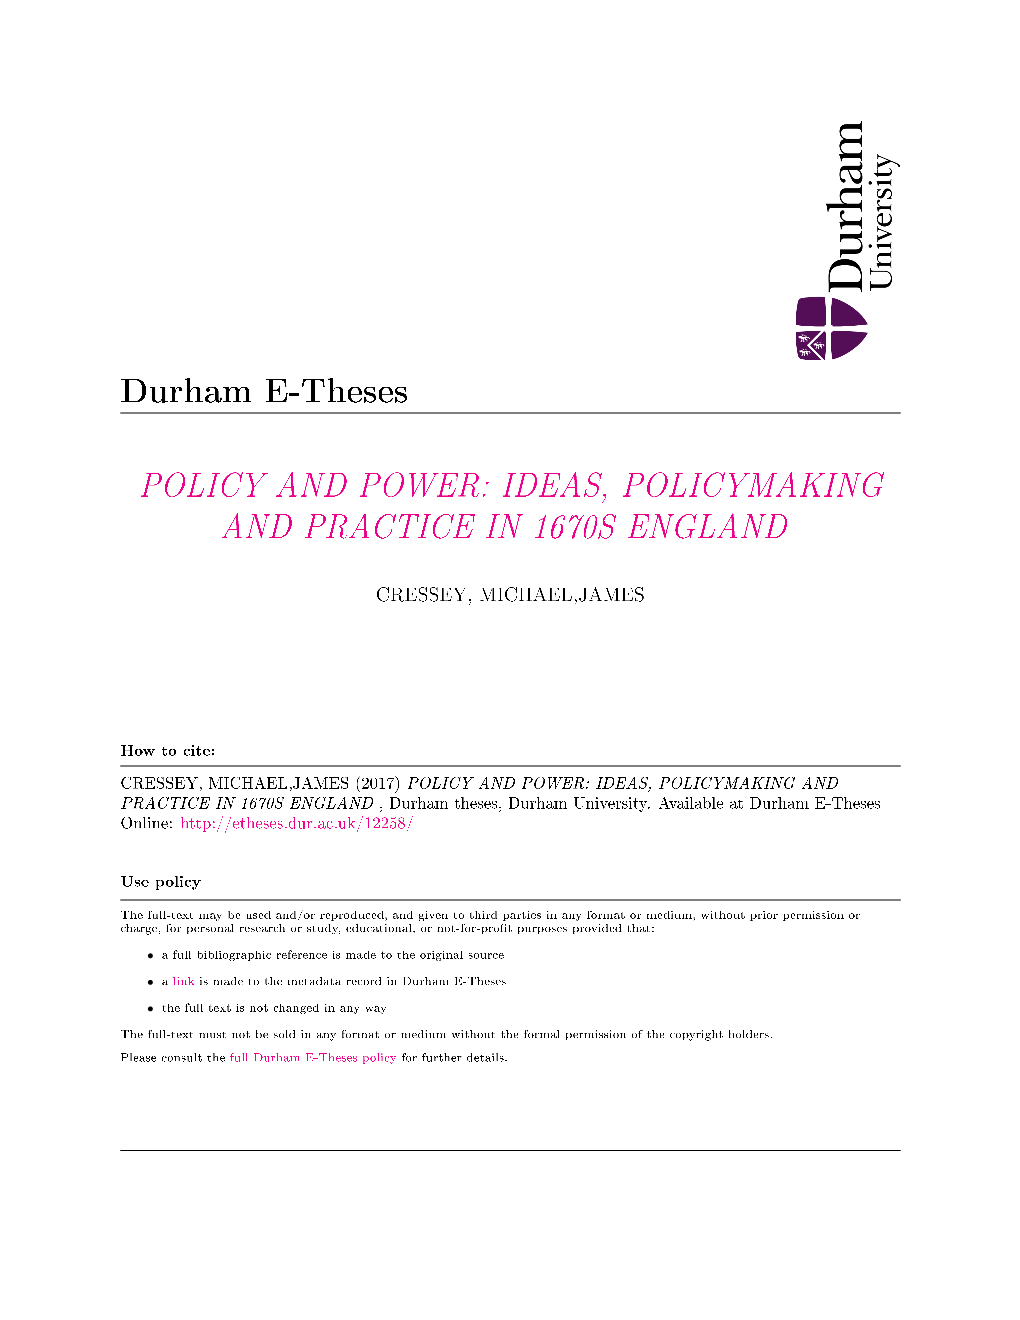 Policy and Power Ideas, Policymaking and Practice In